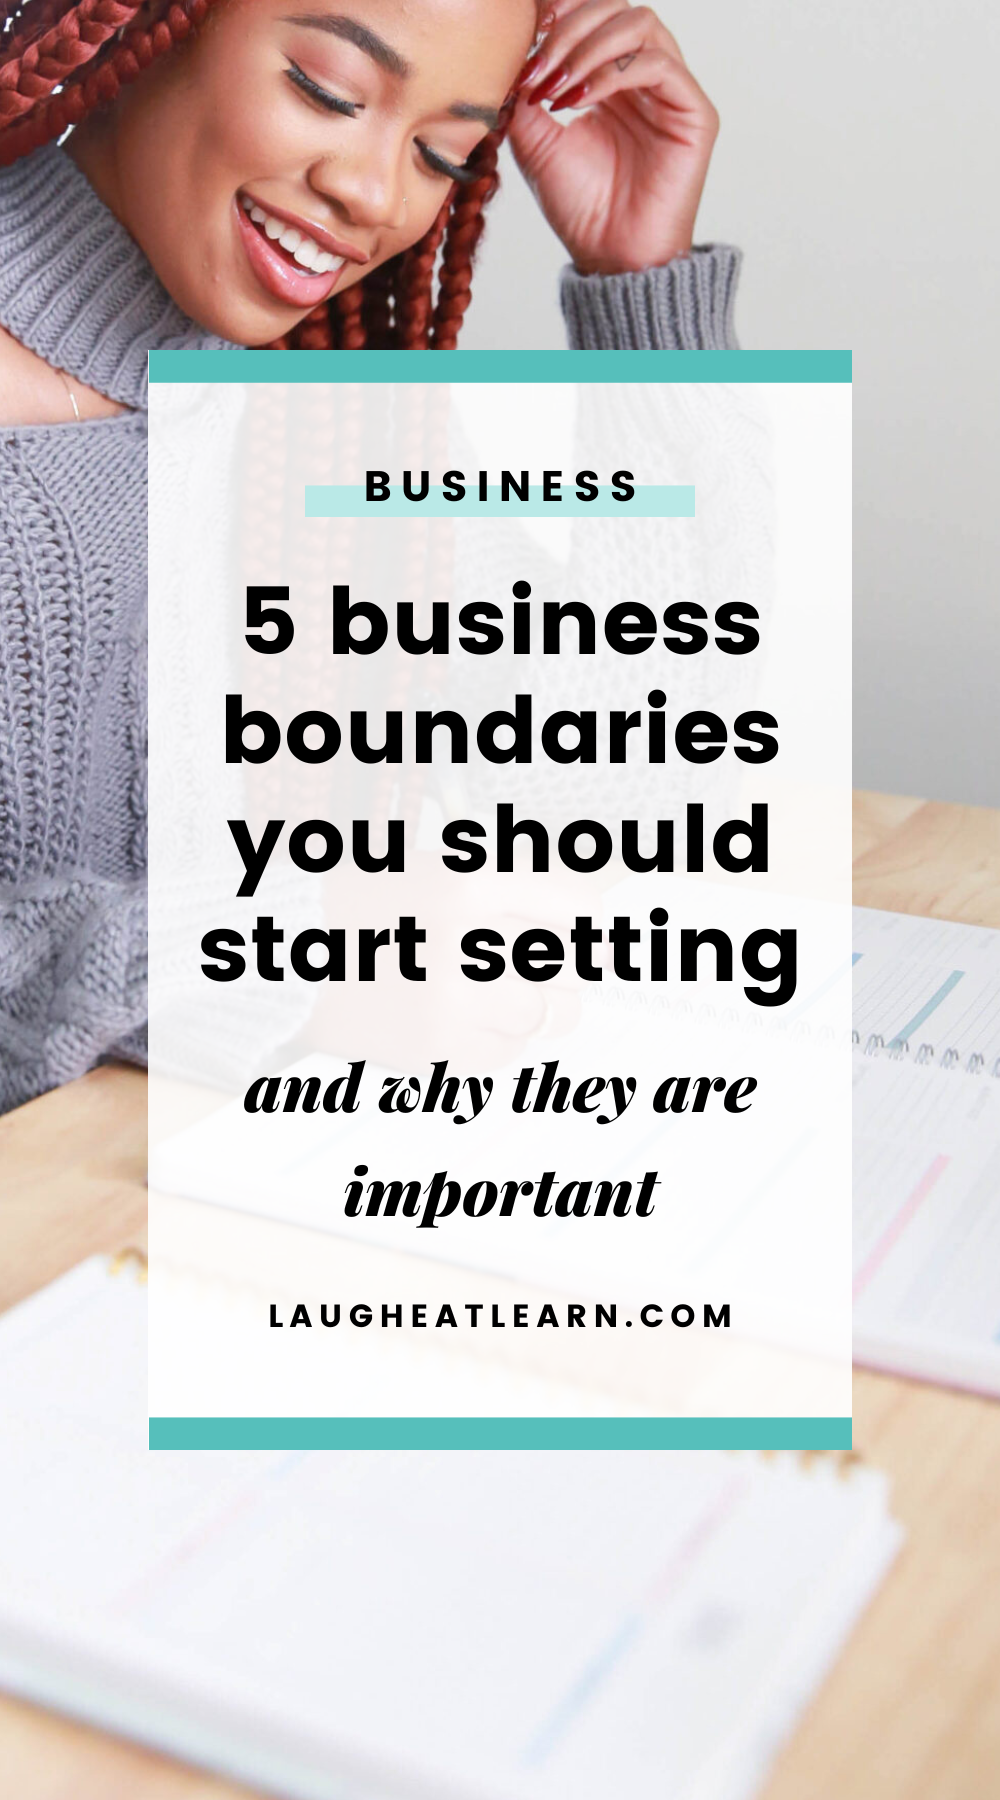 You became an entrepreneur to be your own boss. So why is it so hard?! I'm sharing five business boundaries to manage the small biz life.